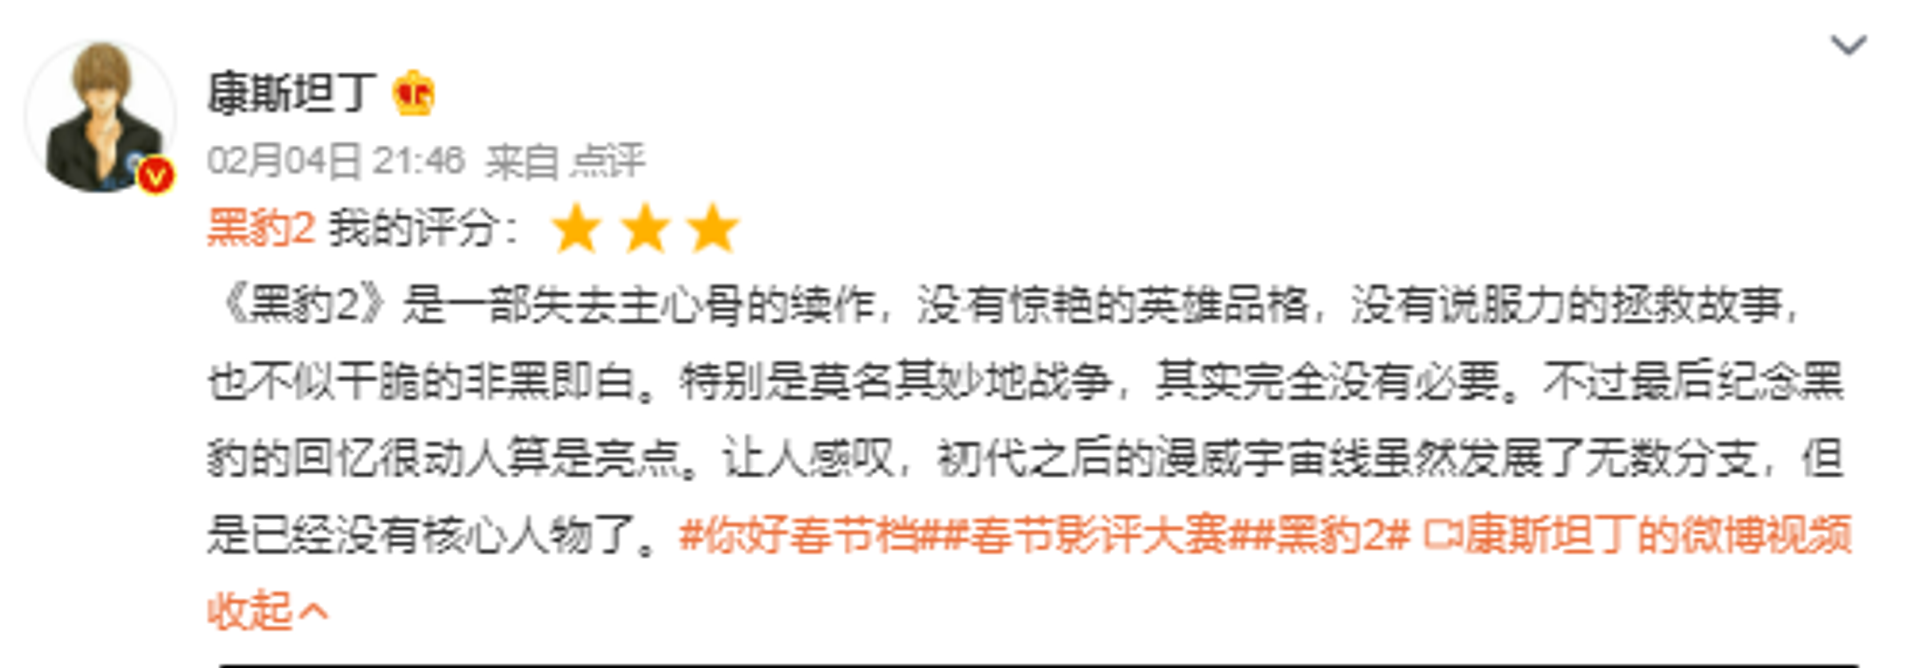 Weibo review on Black Panther